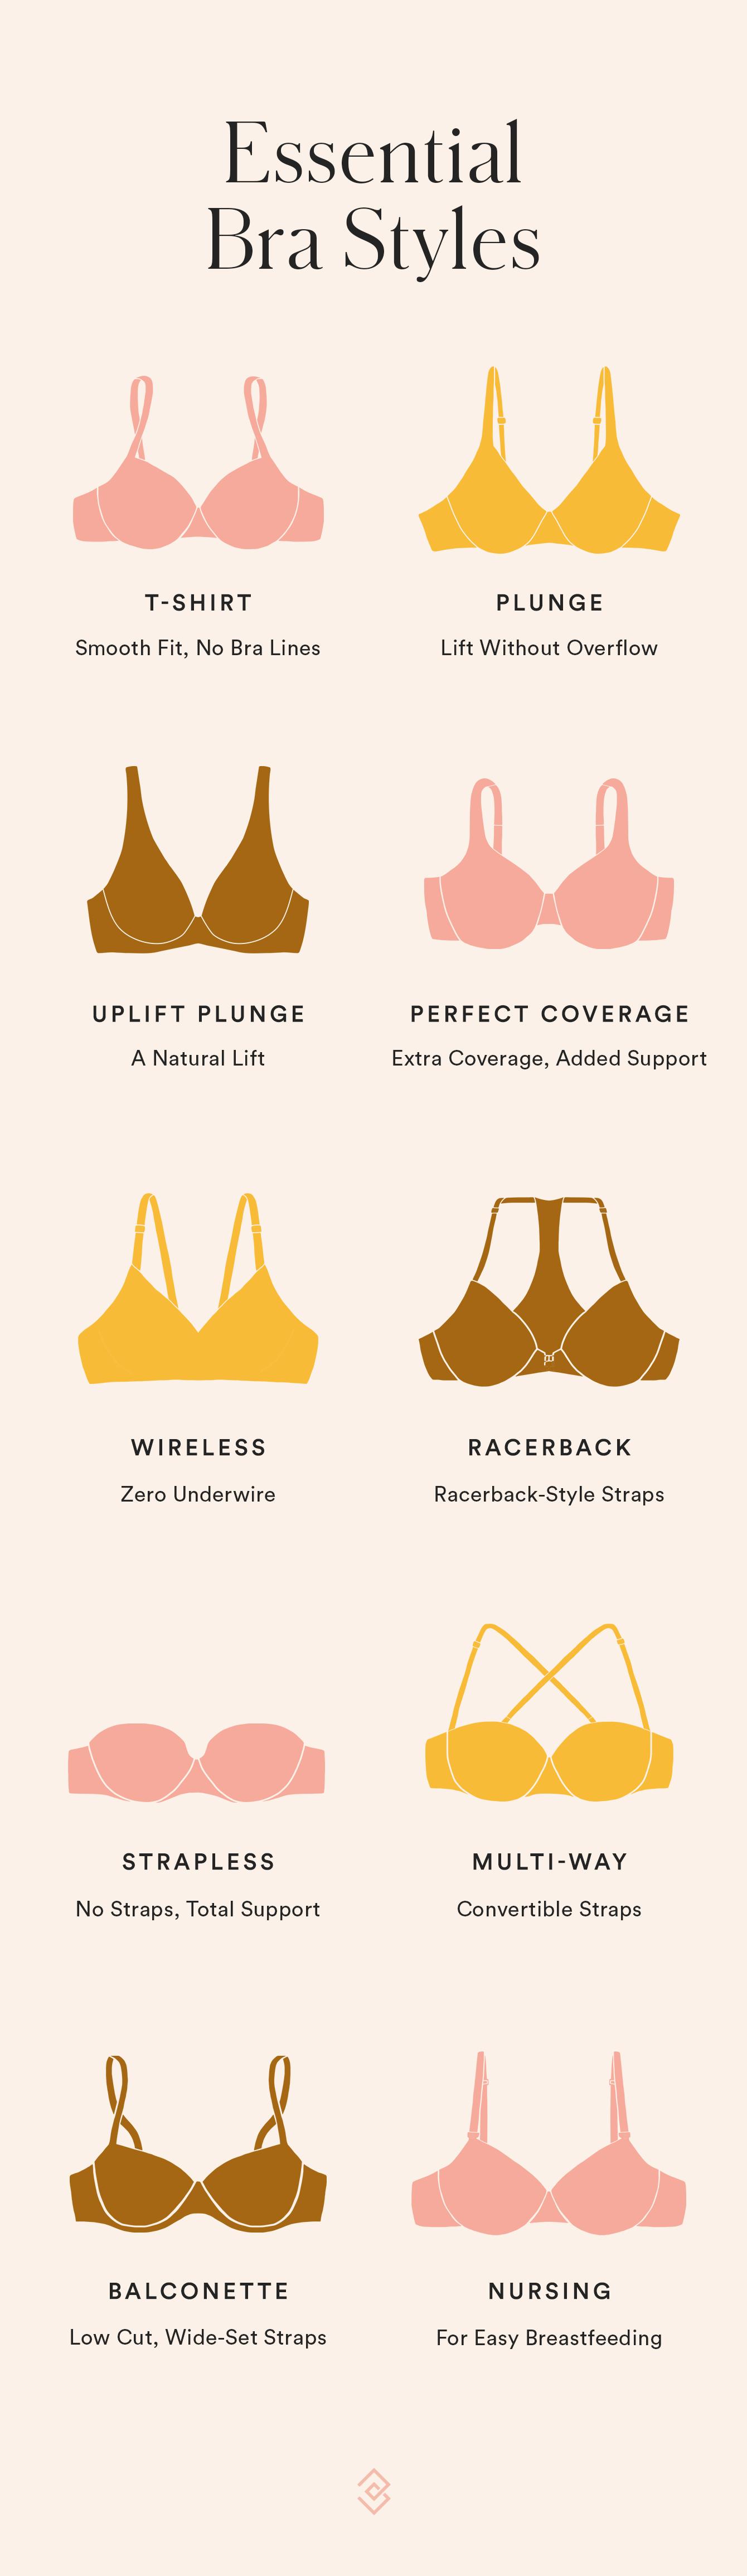 Your Guide to Different Lingerie Types From A-Z